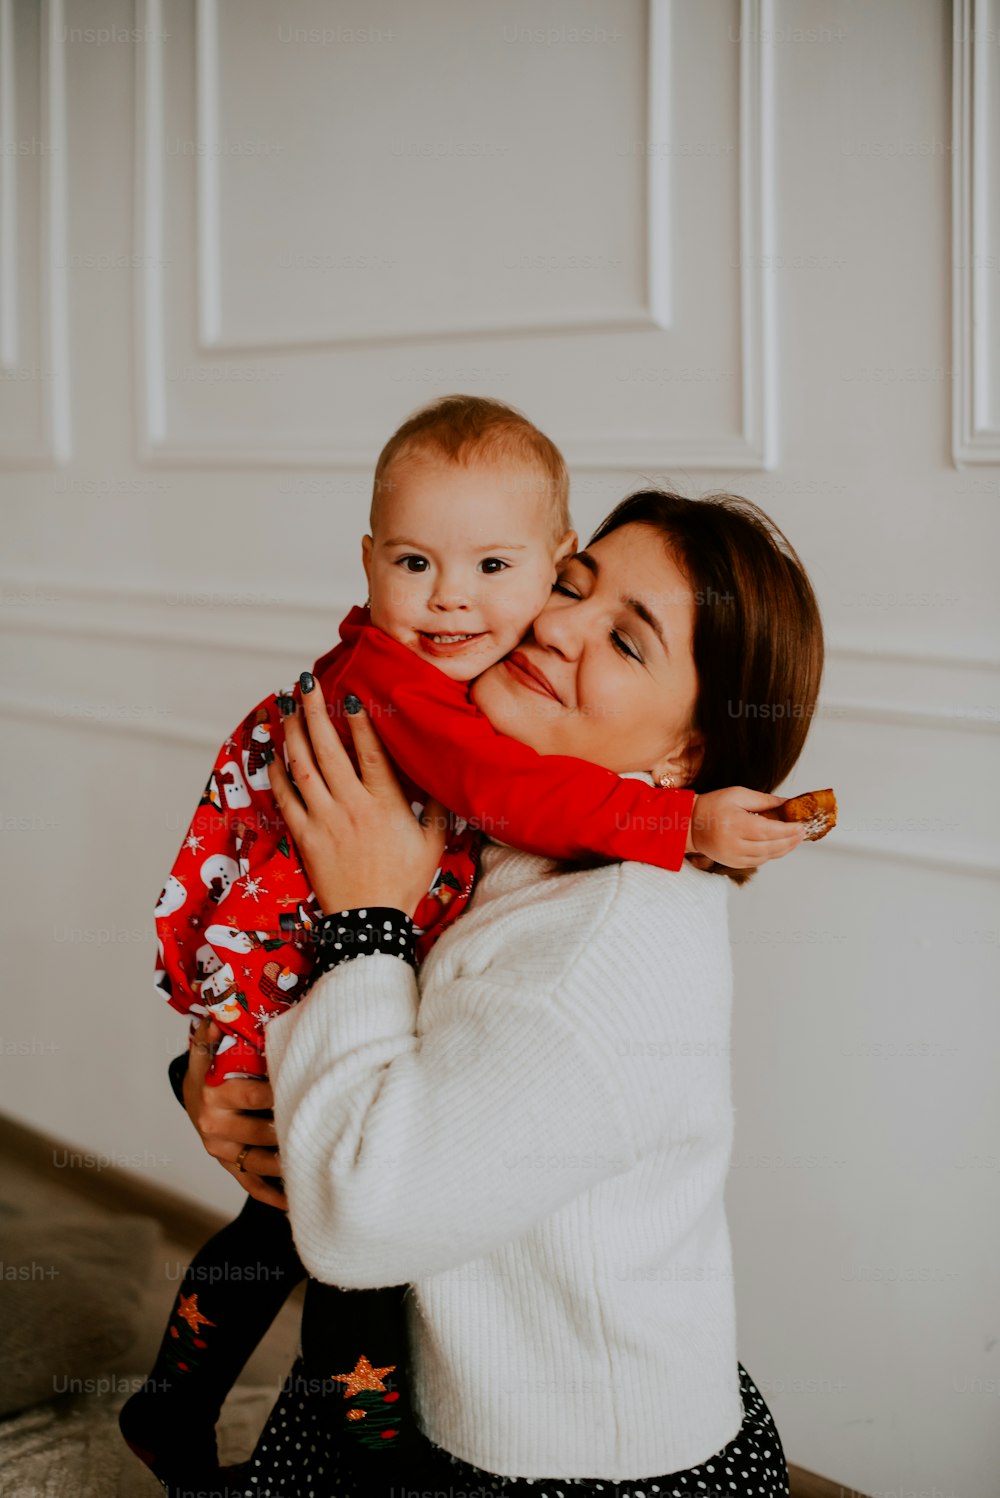 New England Mom And Son Free Dawnlod Siliping Xxx Video - 100+ Mom And Son Pictures | Download Free Images on Unsplash